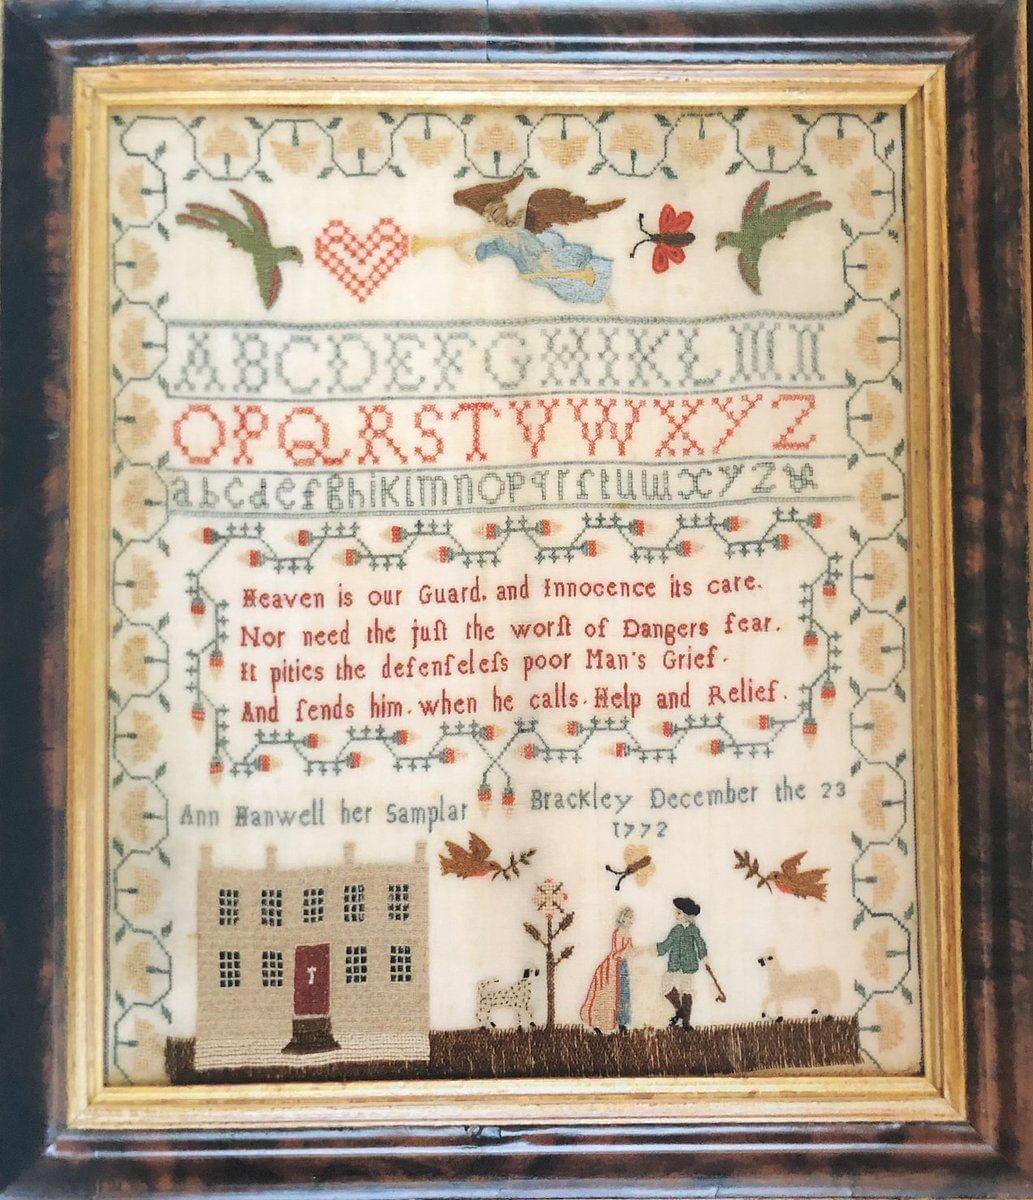 Ann Hanwell finished her sampler, which features a couple in an idealised countryside scene, on 23 December 1772. Ann's family came from Kidlington, Oxfordshire, 17 miles away from Brackley, where she attended a small school. She was born in 1763 to Thomas Hanwell and Mary Hill